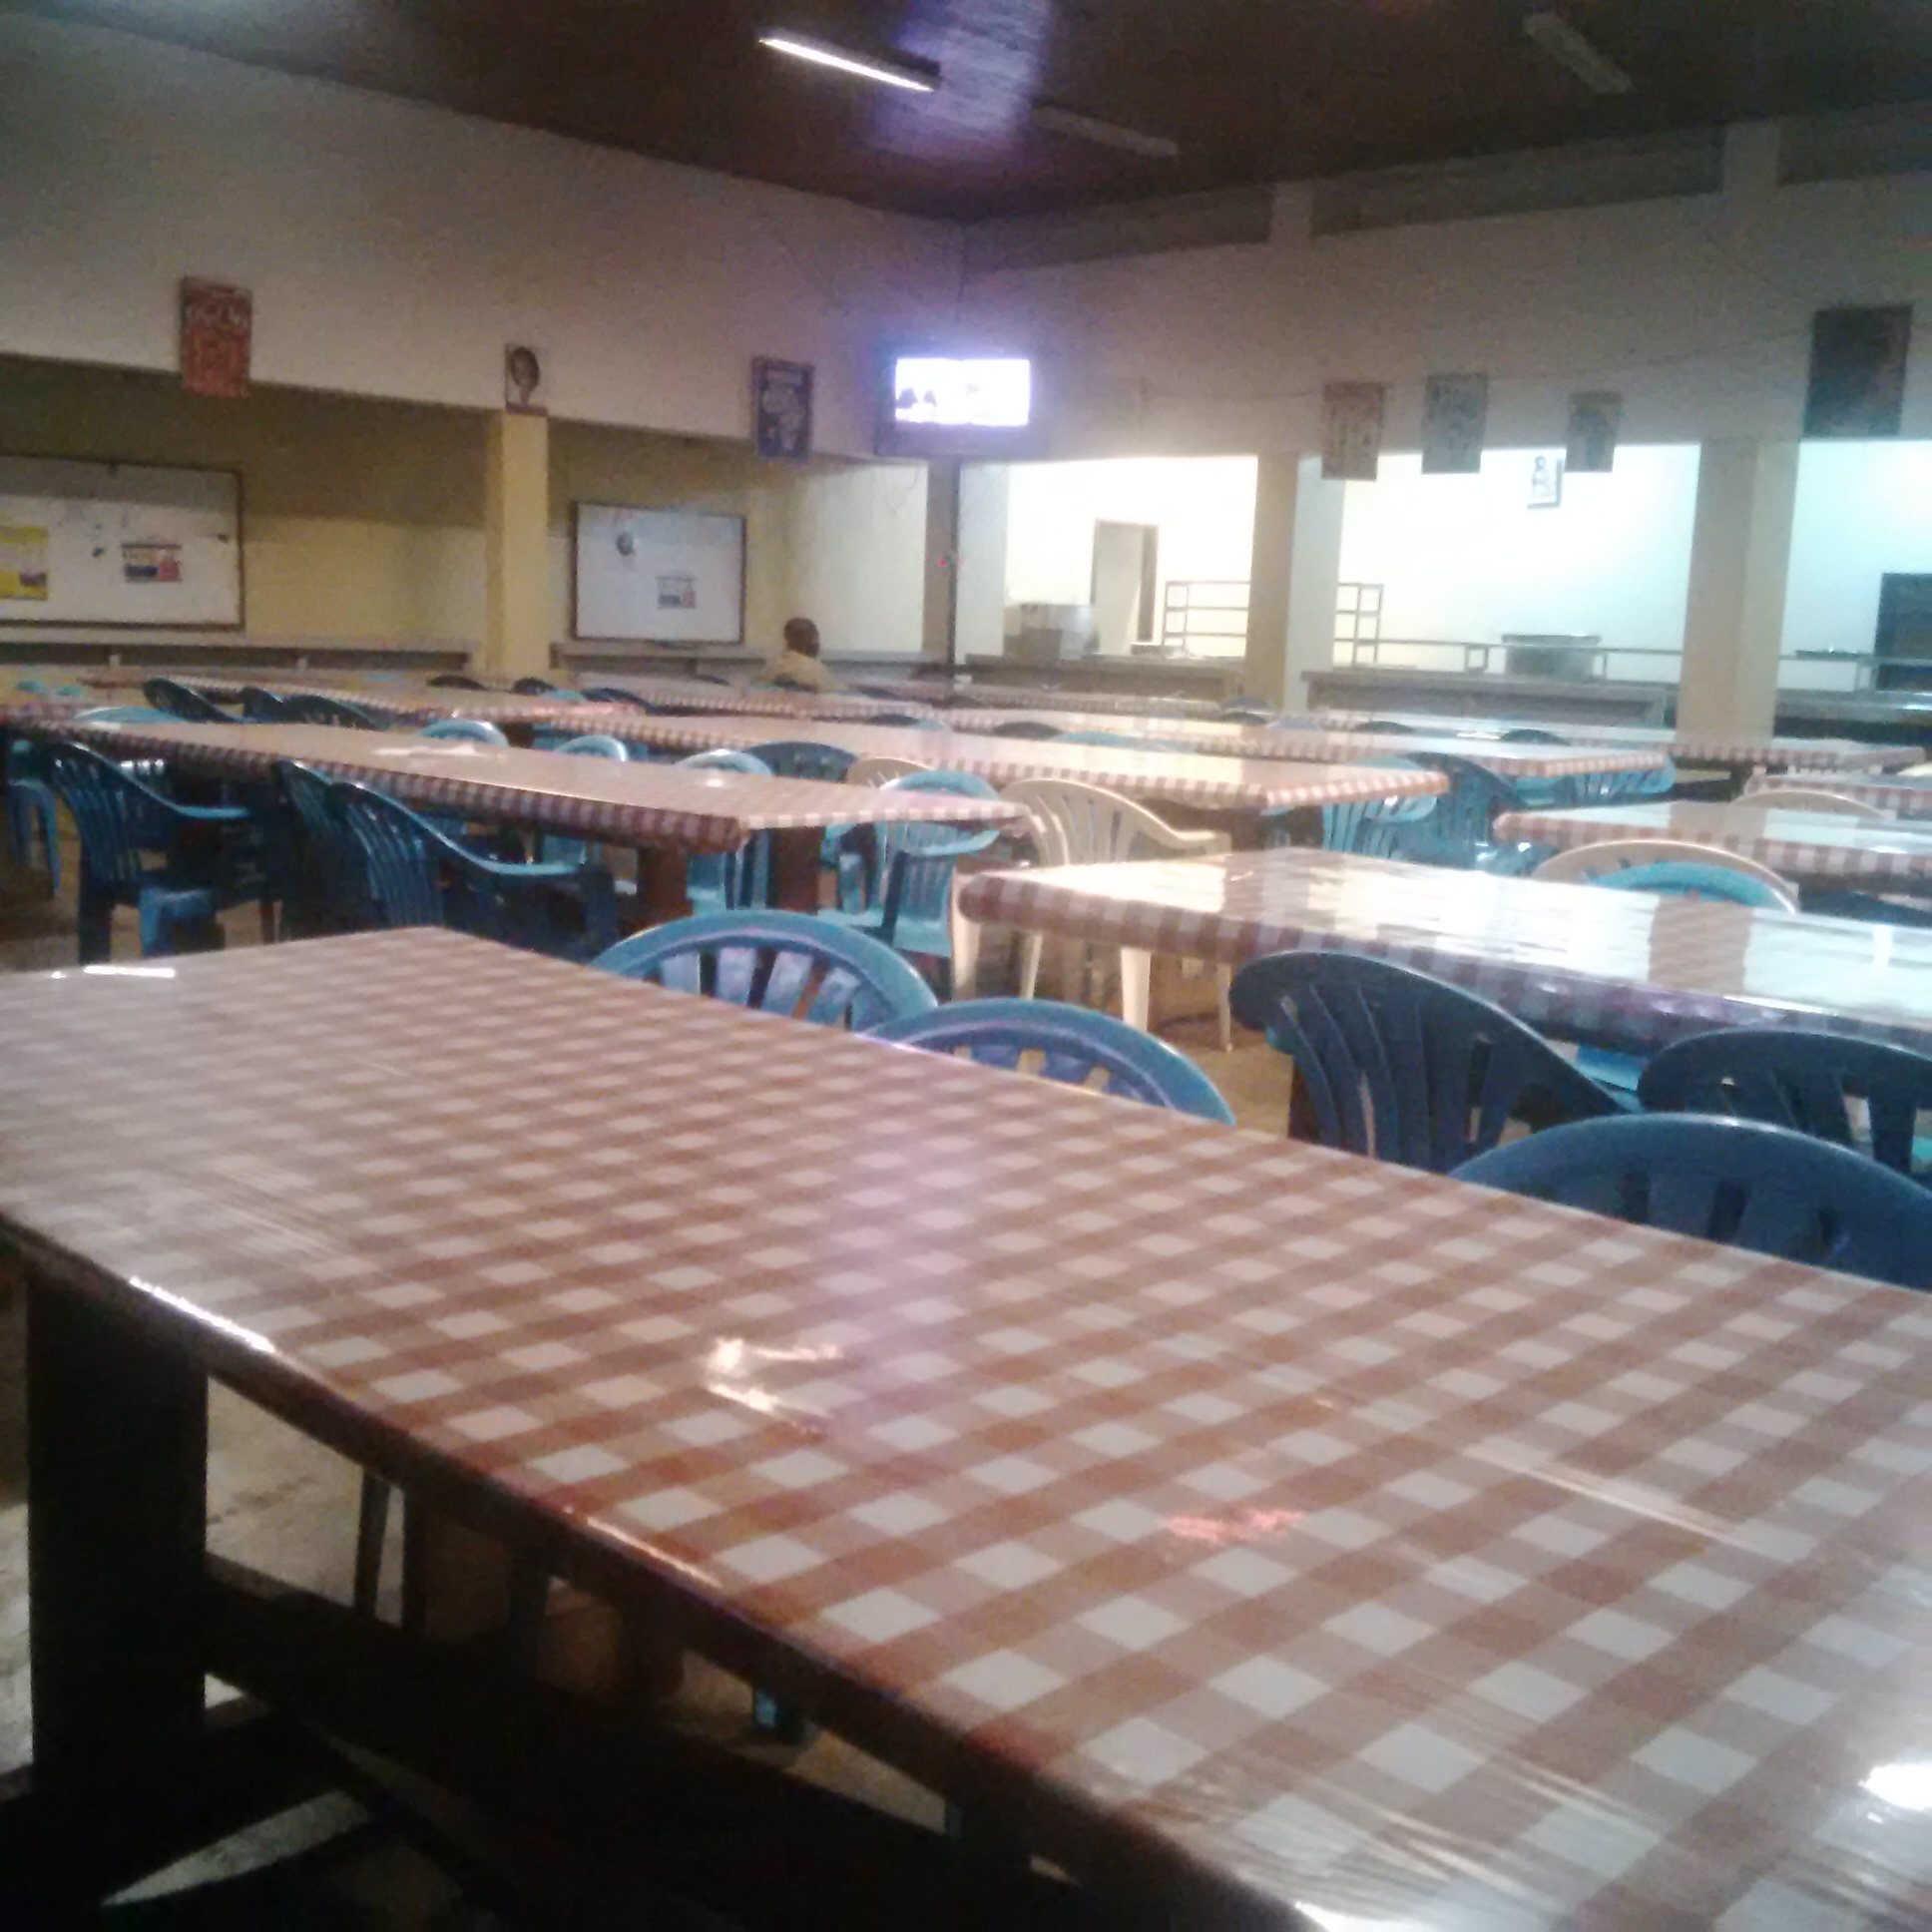 The empty meal hall